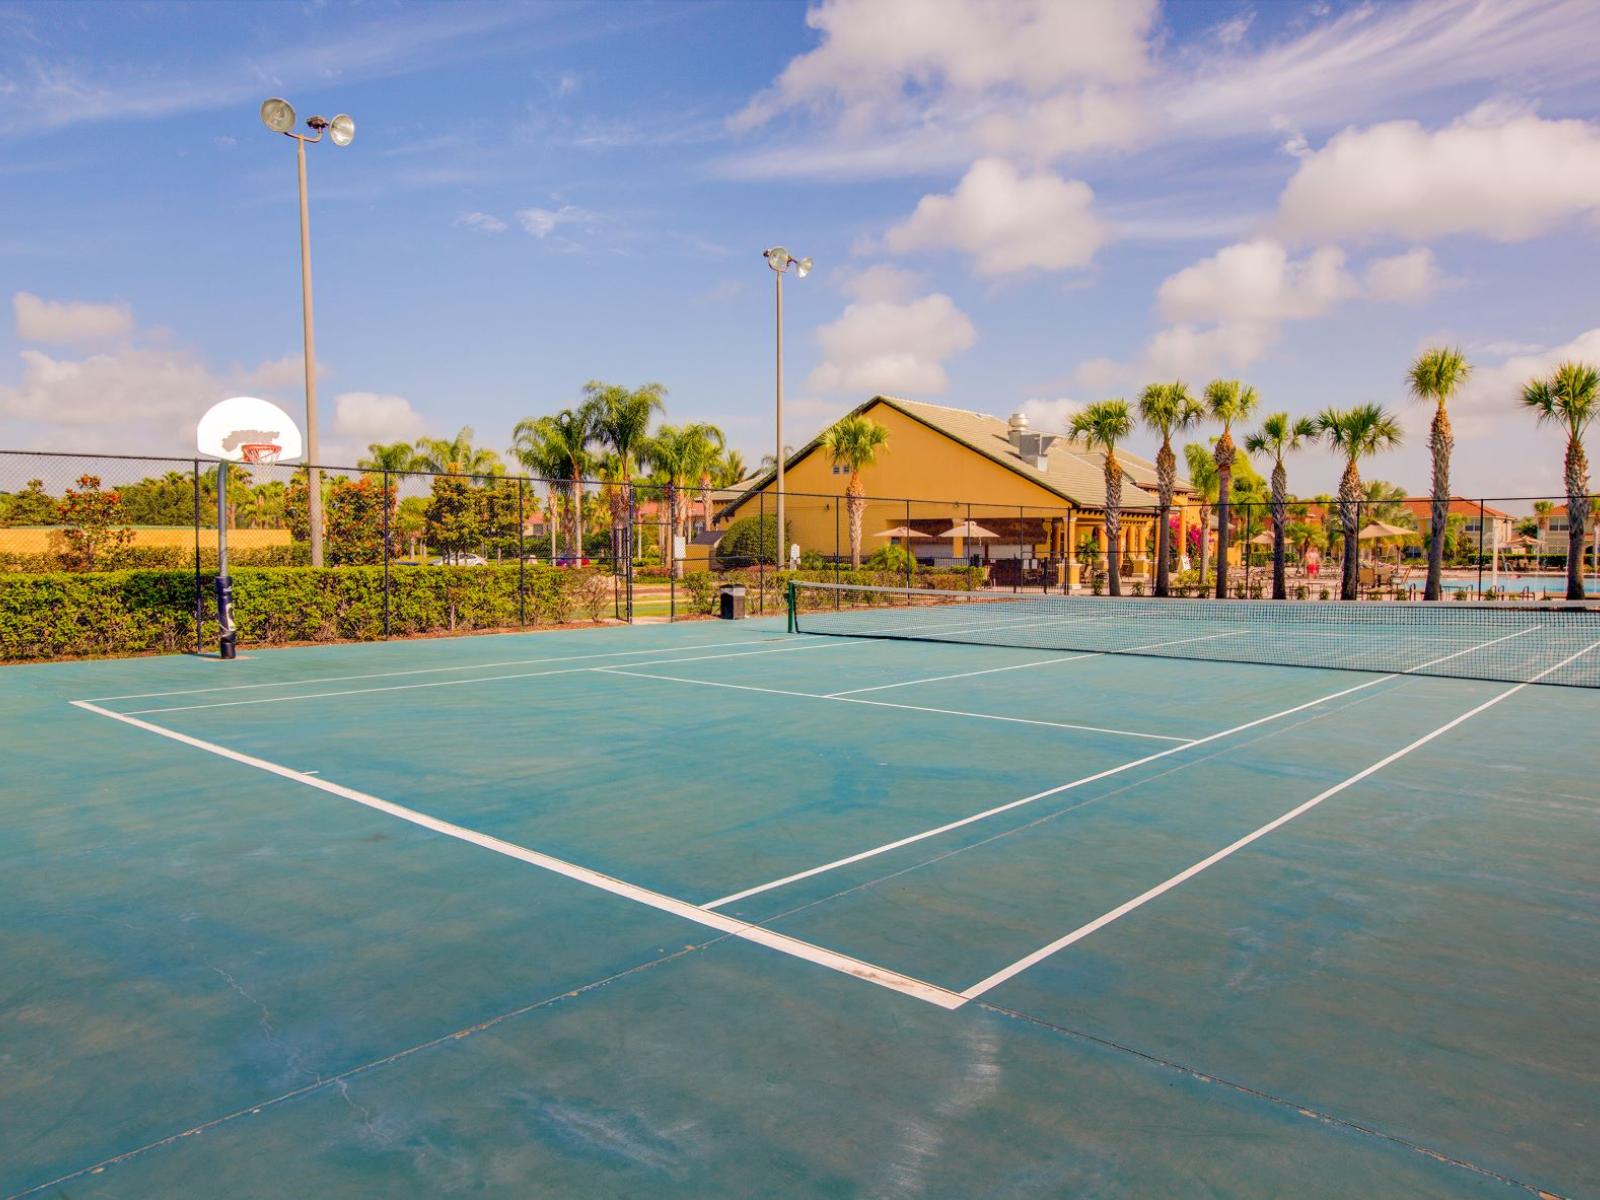 Paradise Palms - Tennis and Basketball